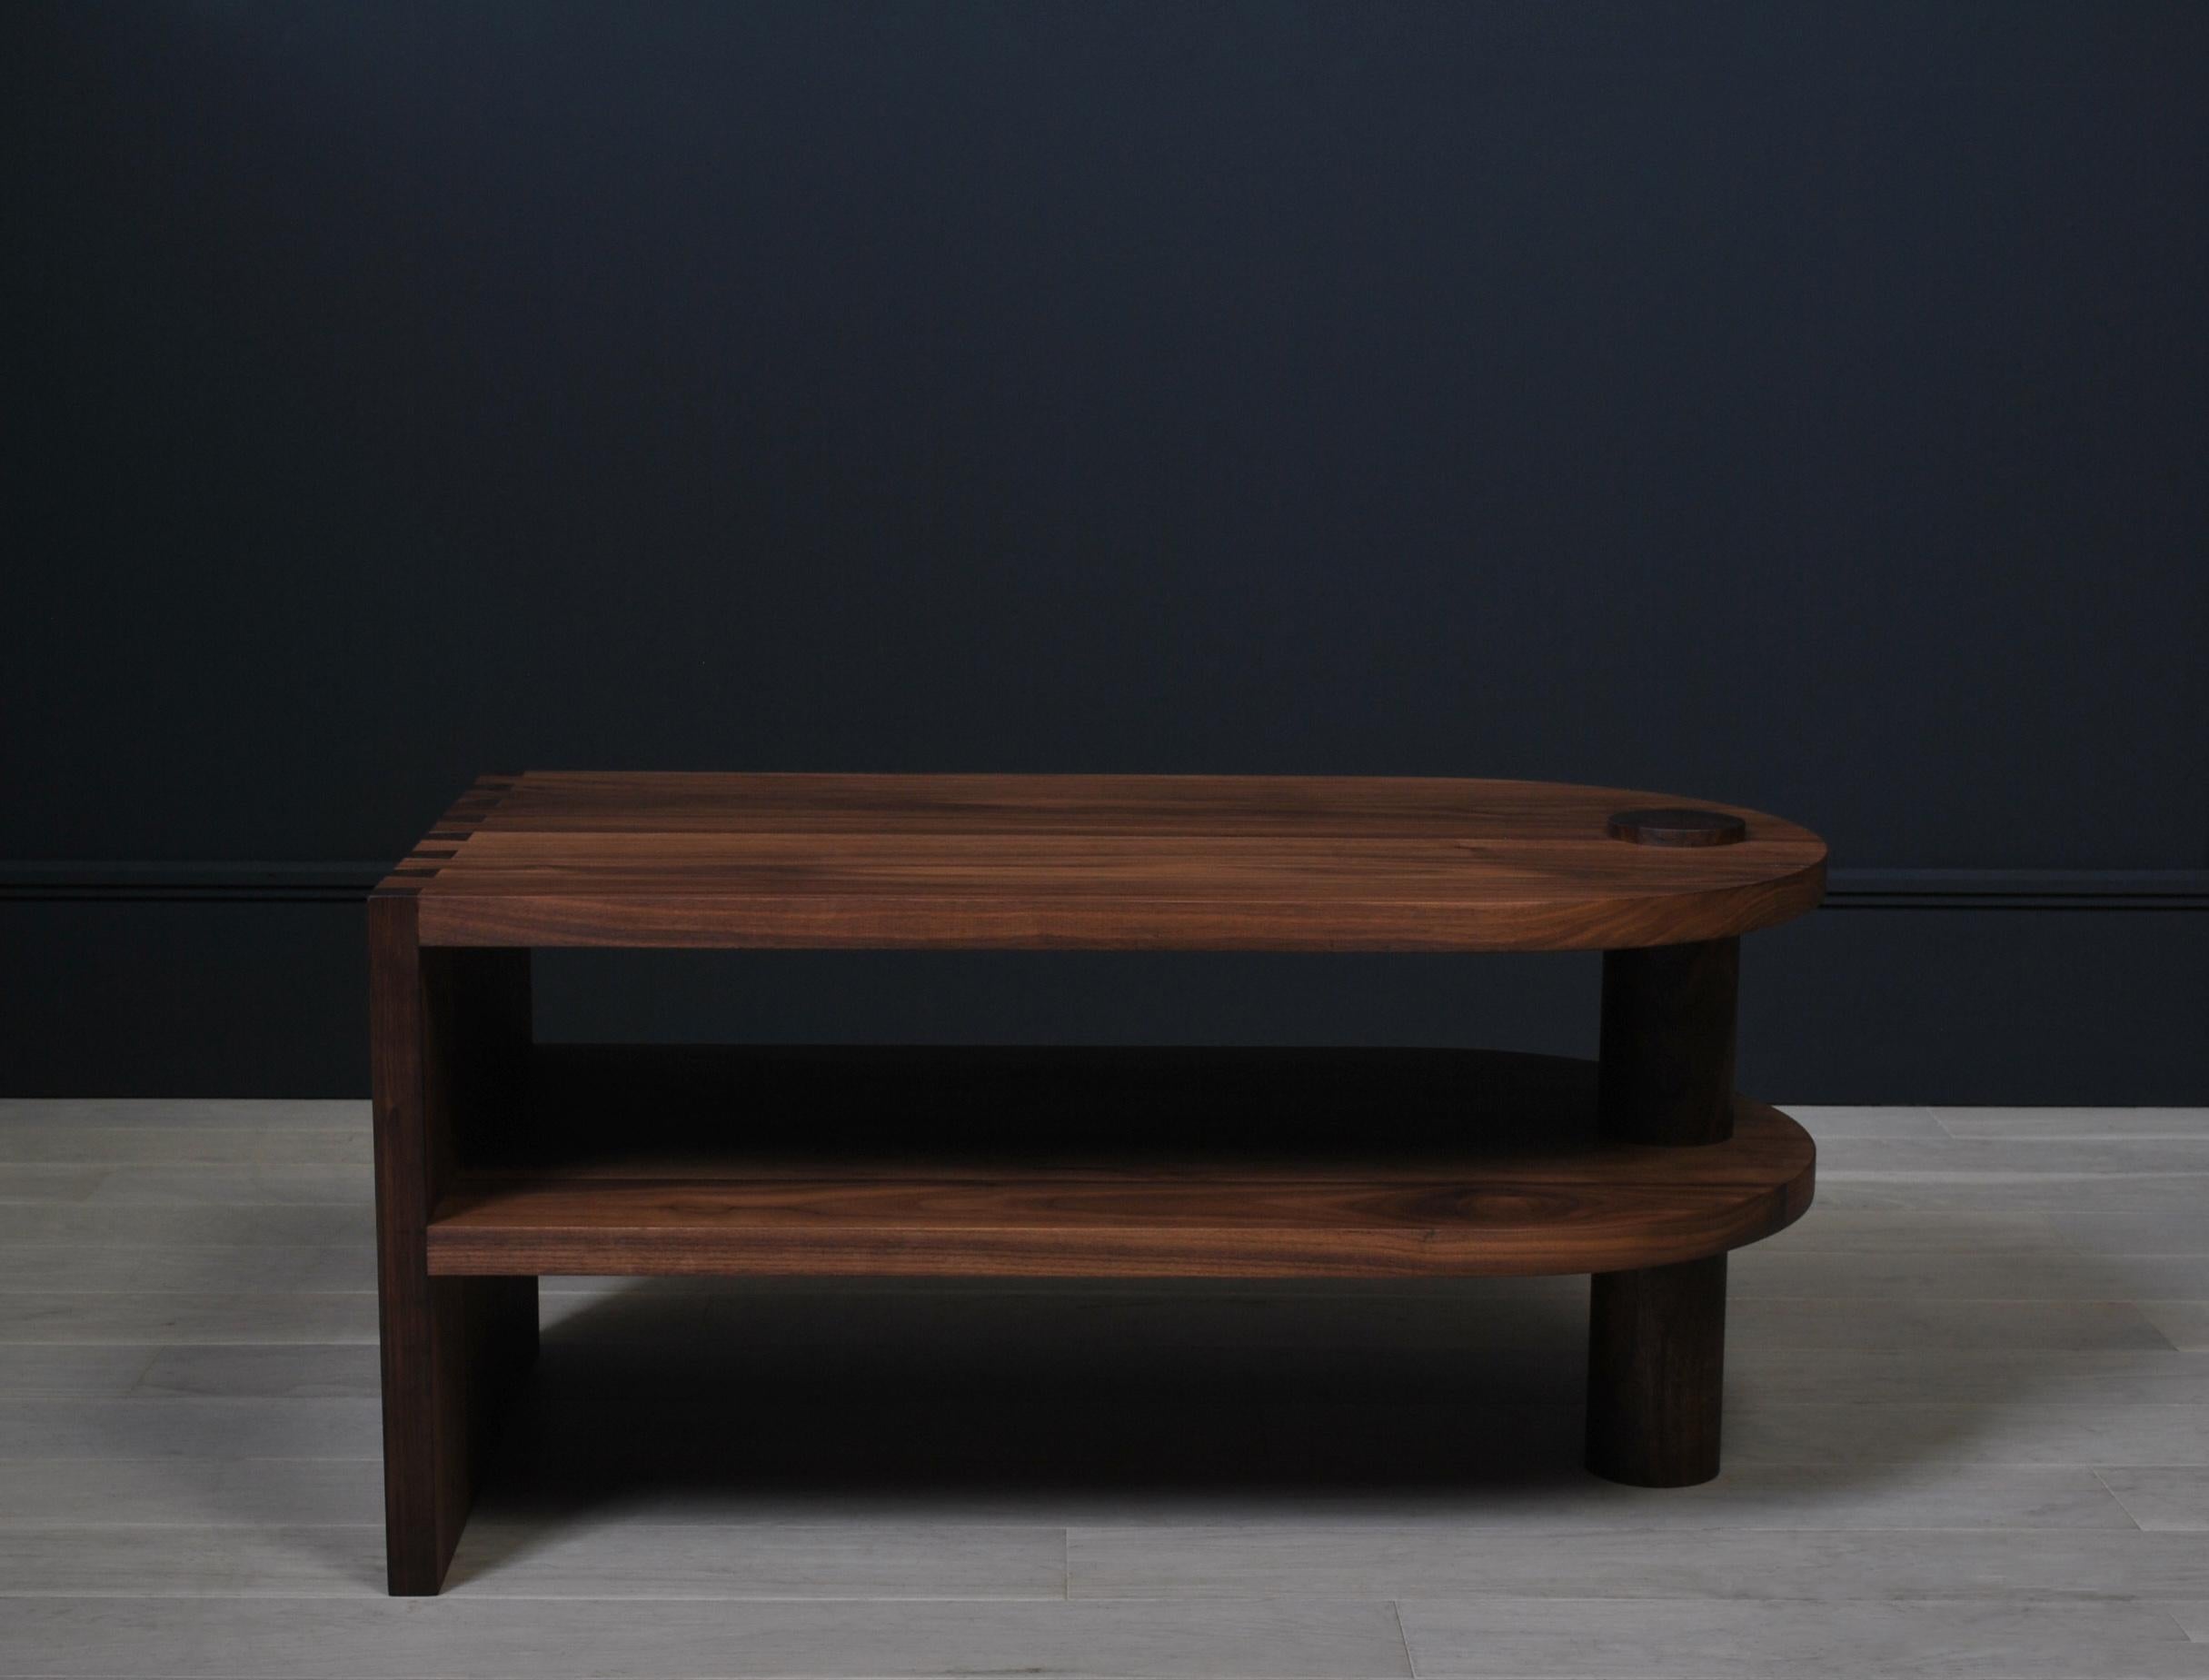 English Architectural Handcrafted Walnut Coffee Table